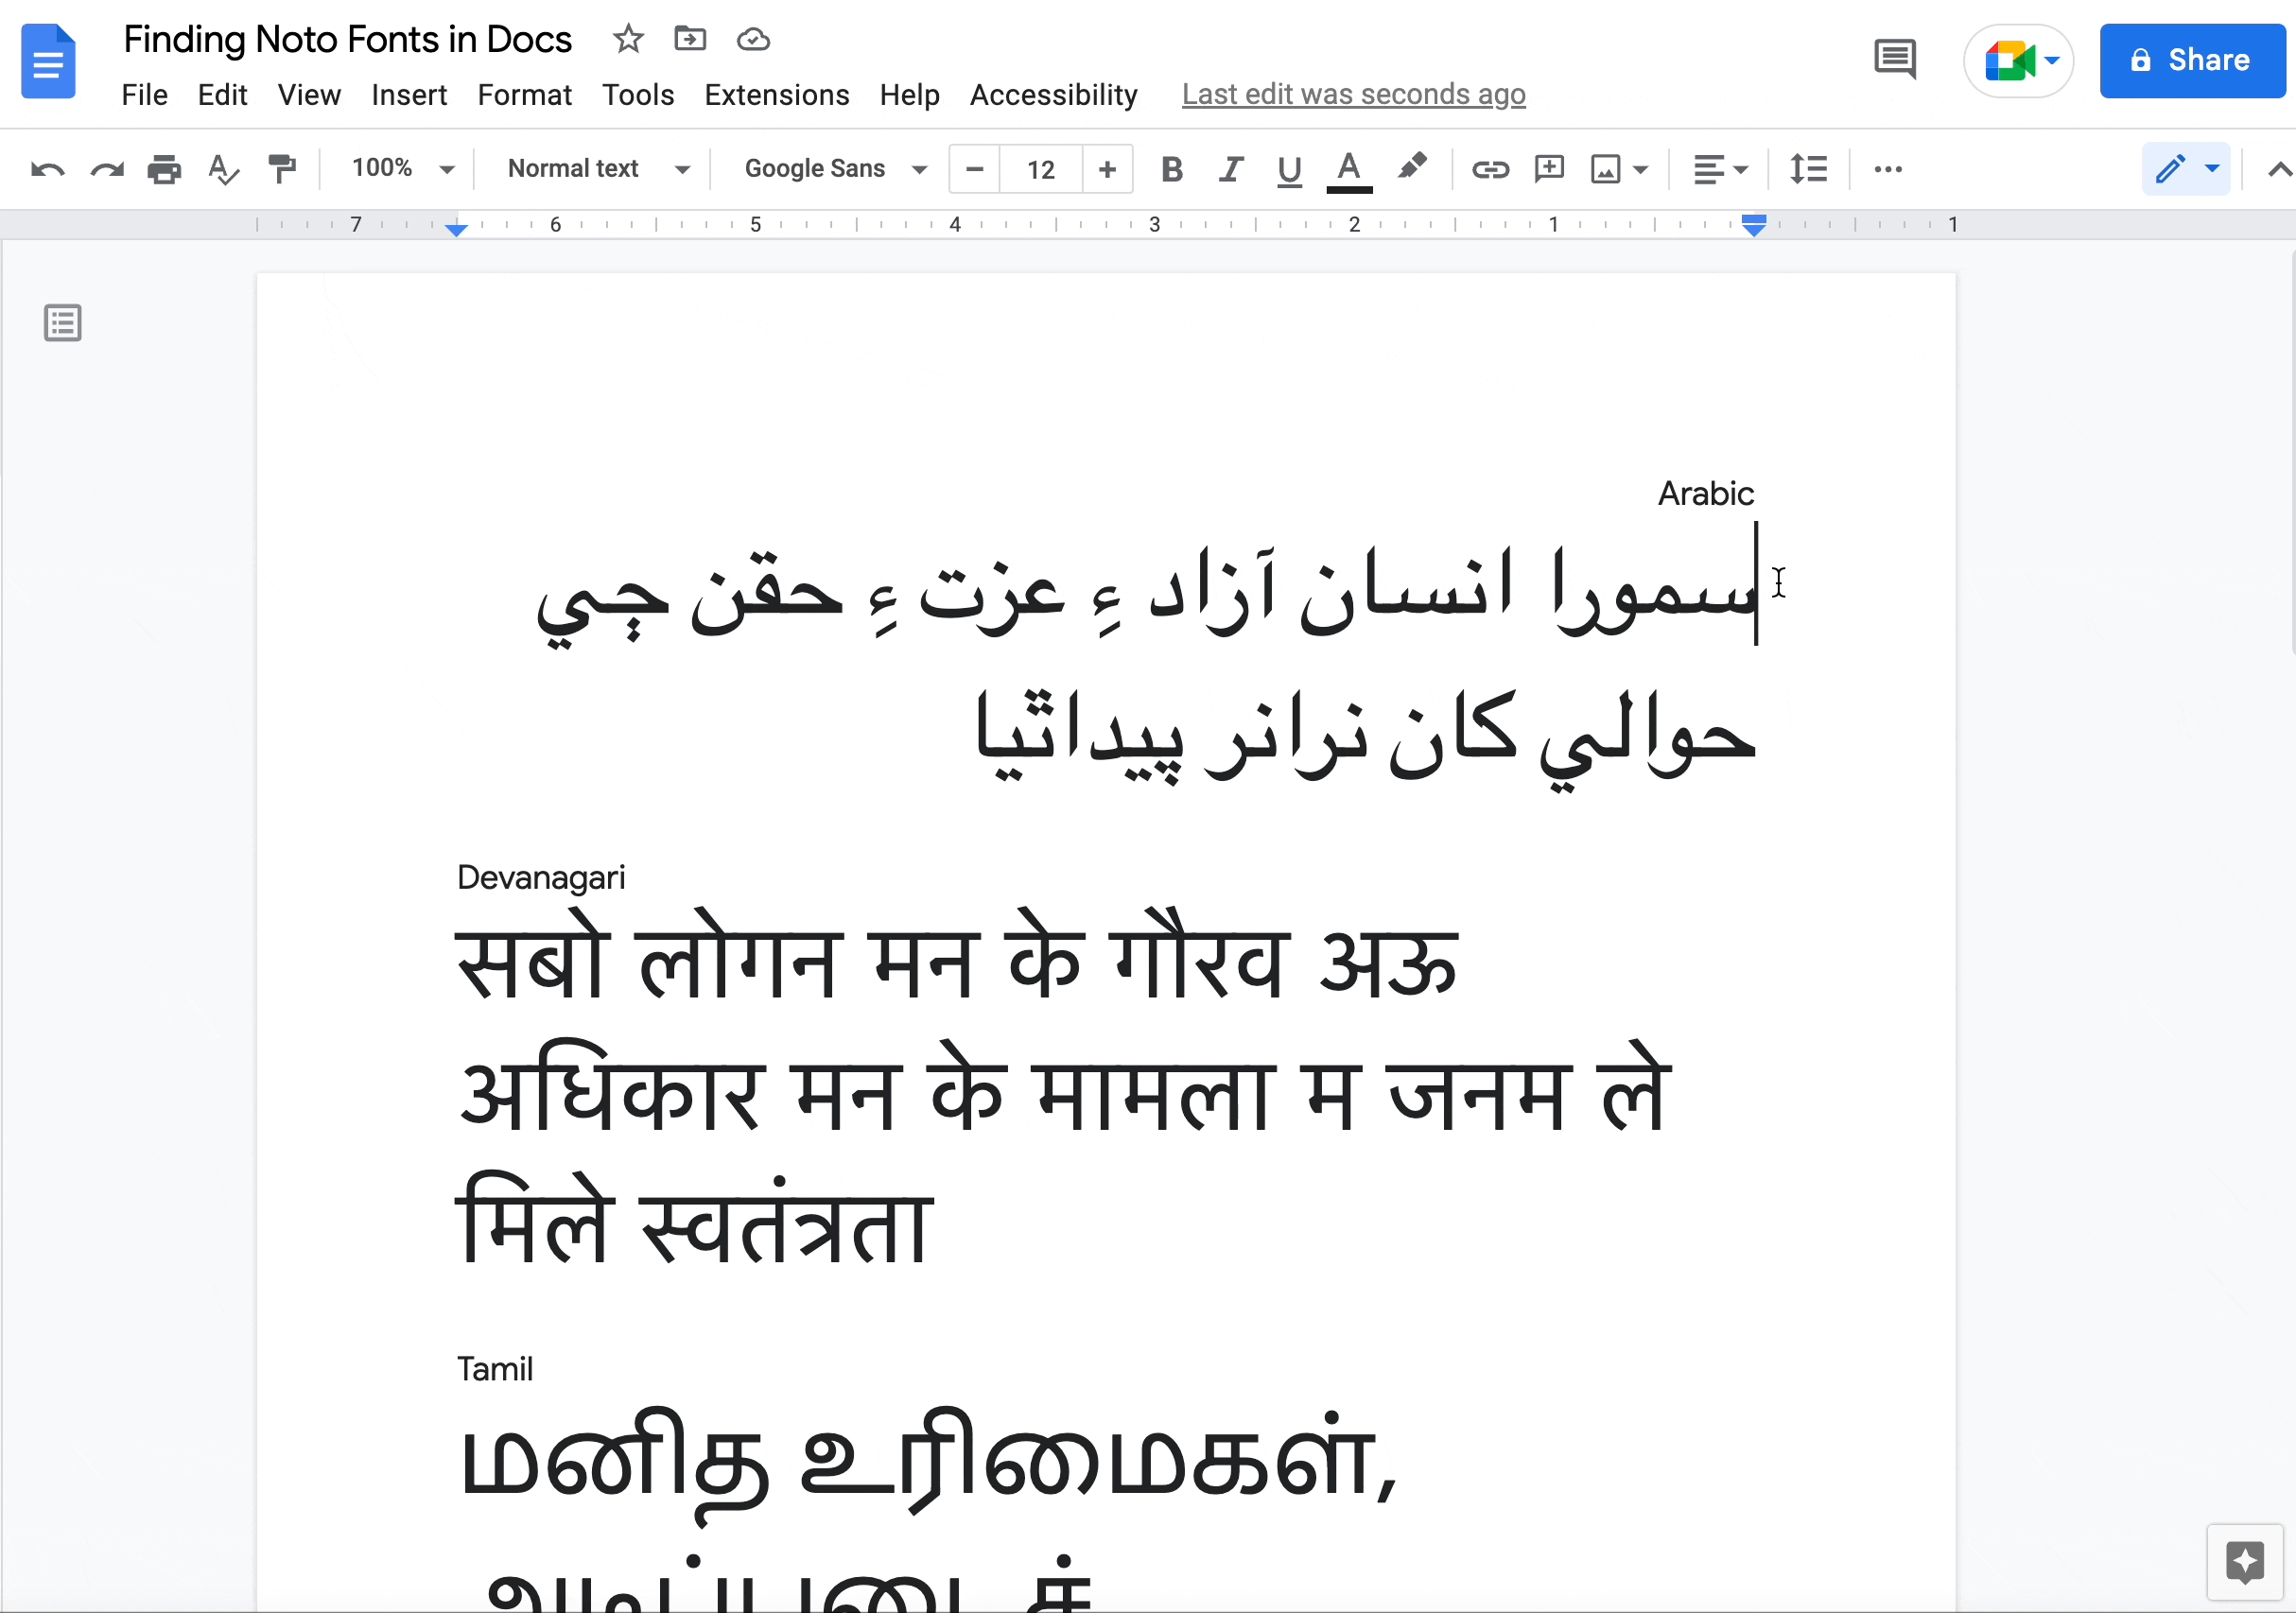 GIF with text in Arabic, Devanagari writing, and Tamil in Google Docs